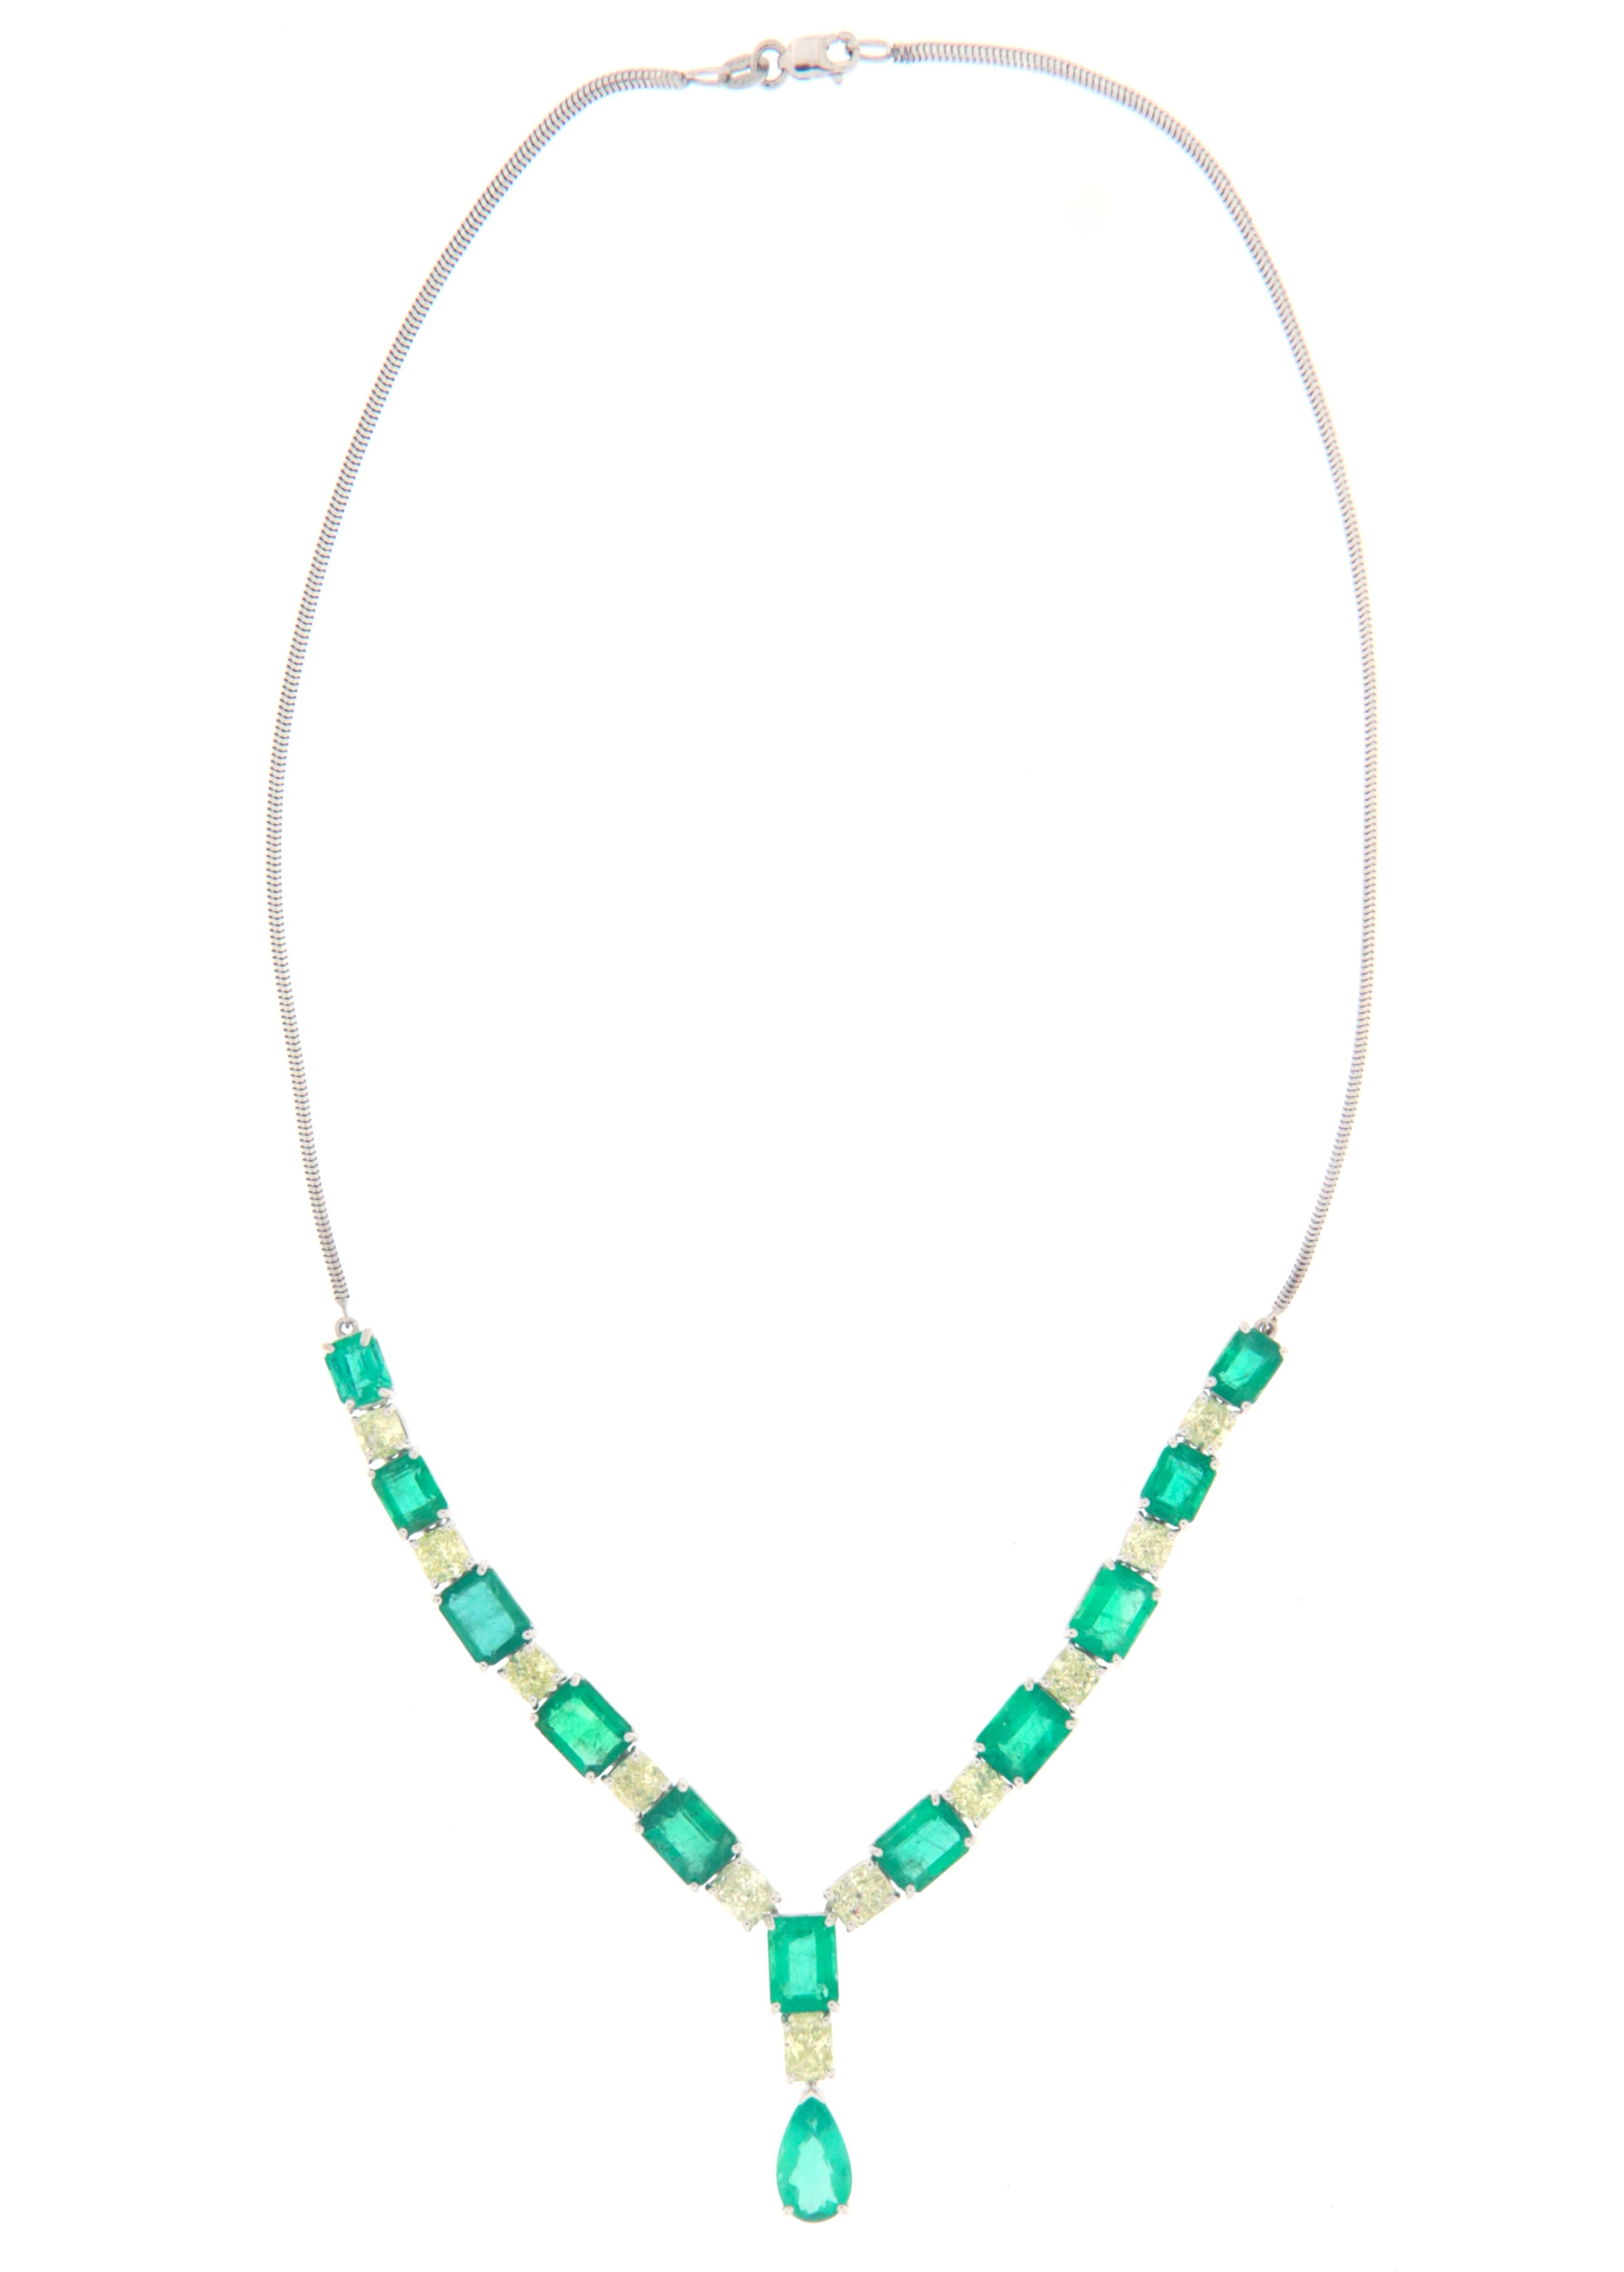 Diamonds Emeralds 18 Karat White Gold Drop Earrings And Choker Necklace For Sale 2